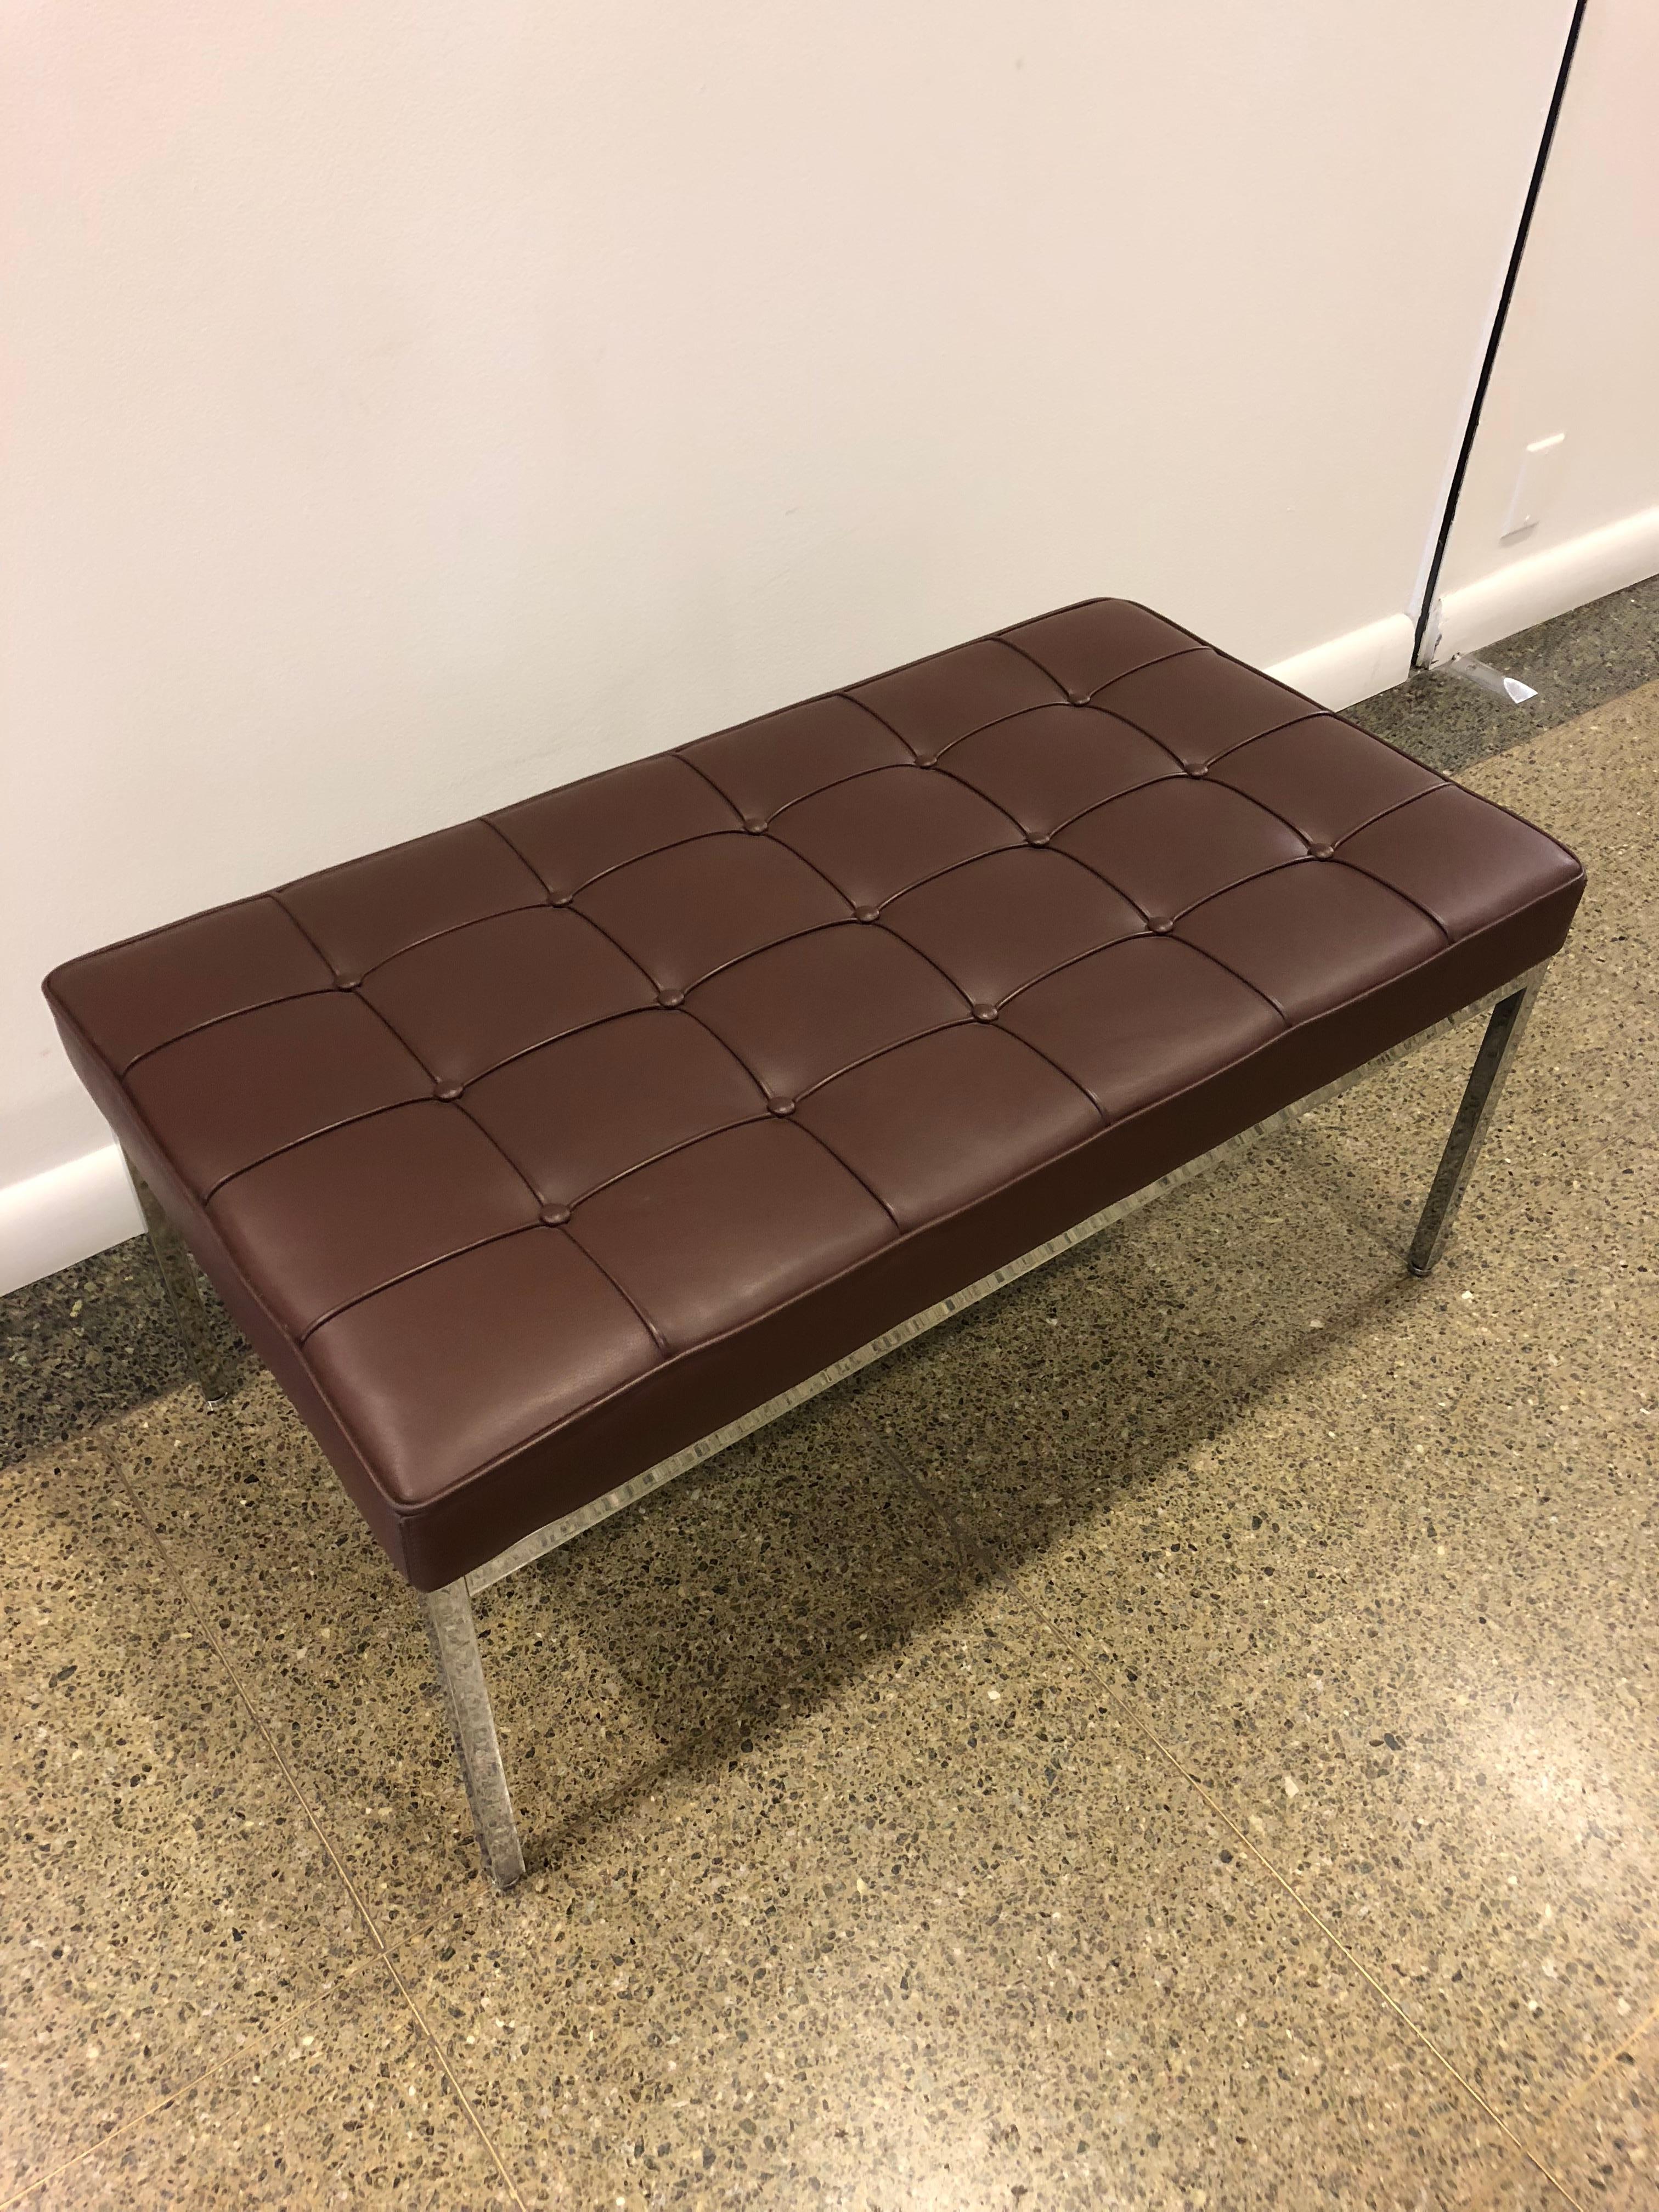 Classic Florence Knoll chocolate brown leather bench with button tufting and piping on chrome base.